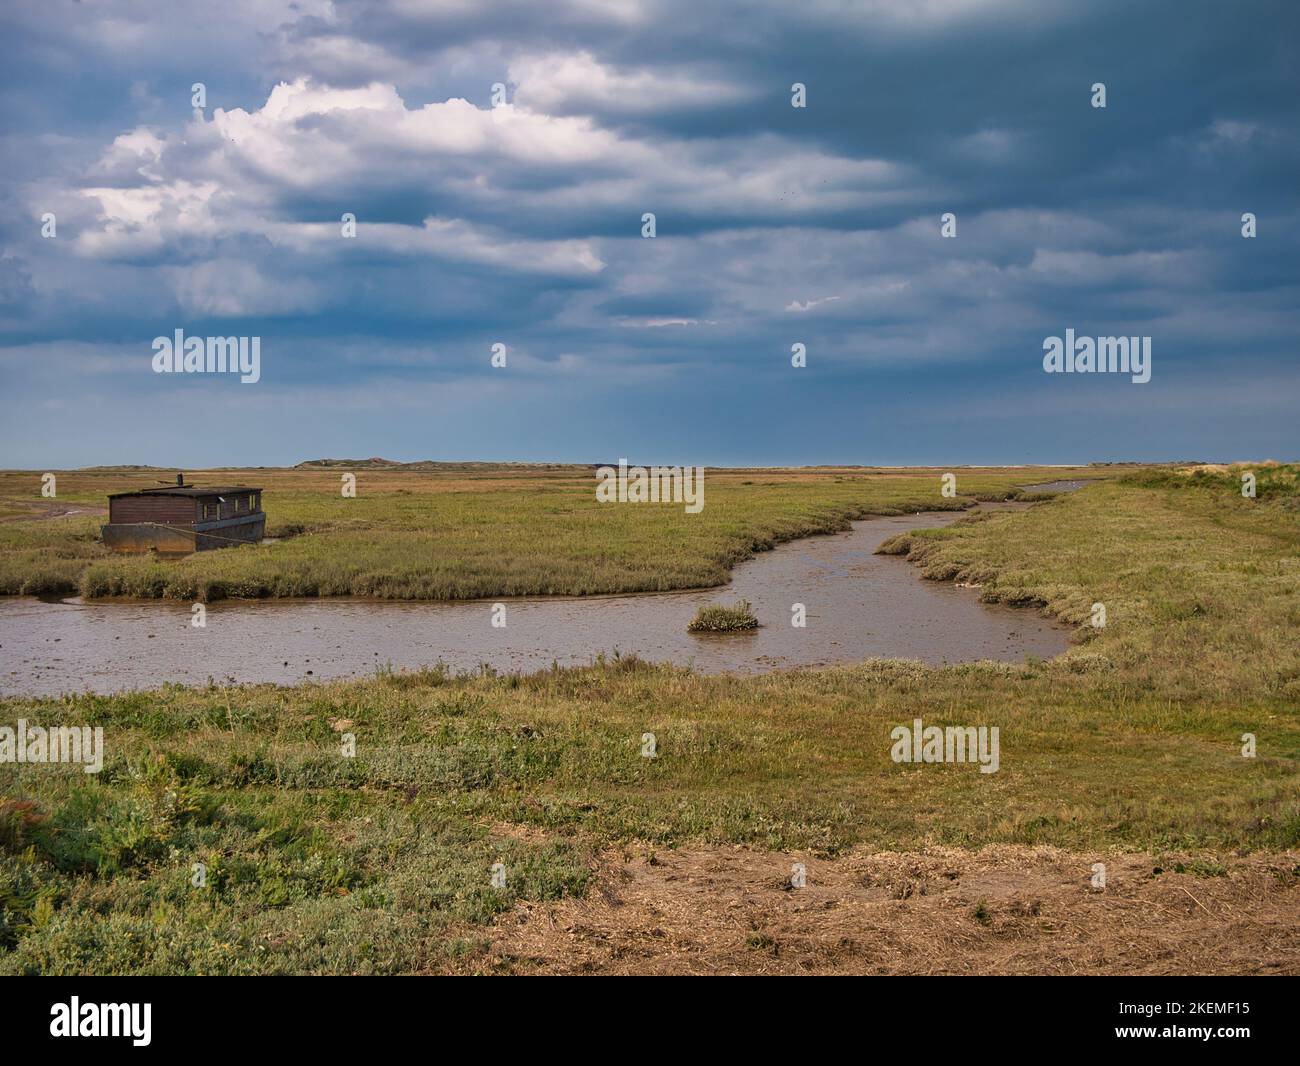 The North Norfolk coastal wetlands, in the east of the UK. Taken on a calm, sunny day in summer with a blue sky. Stock Photo